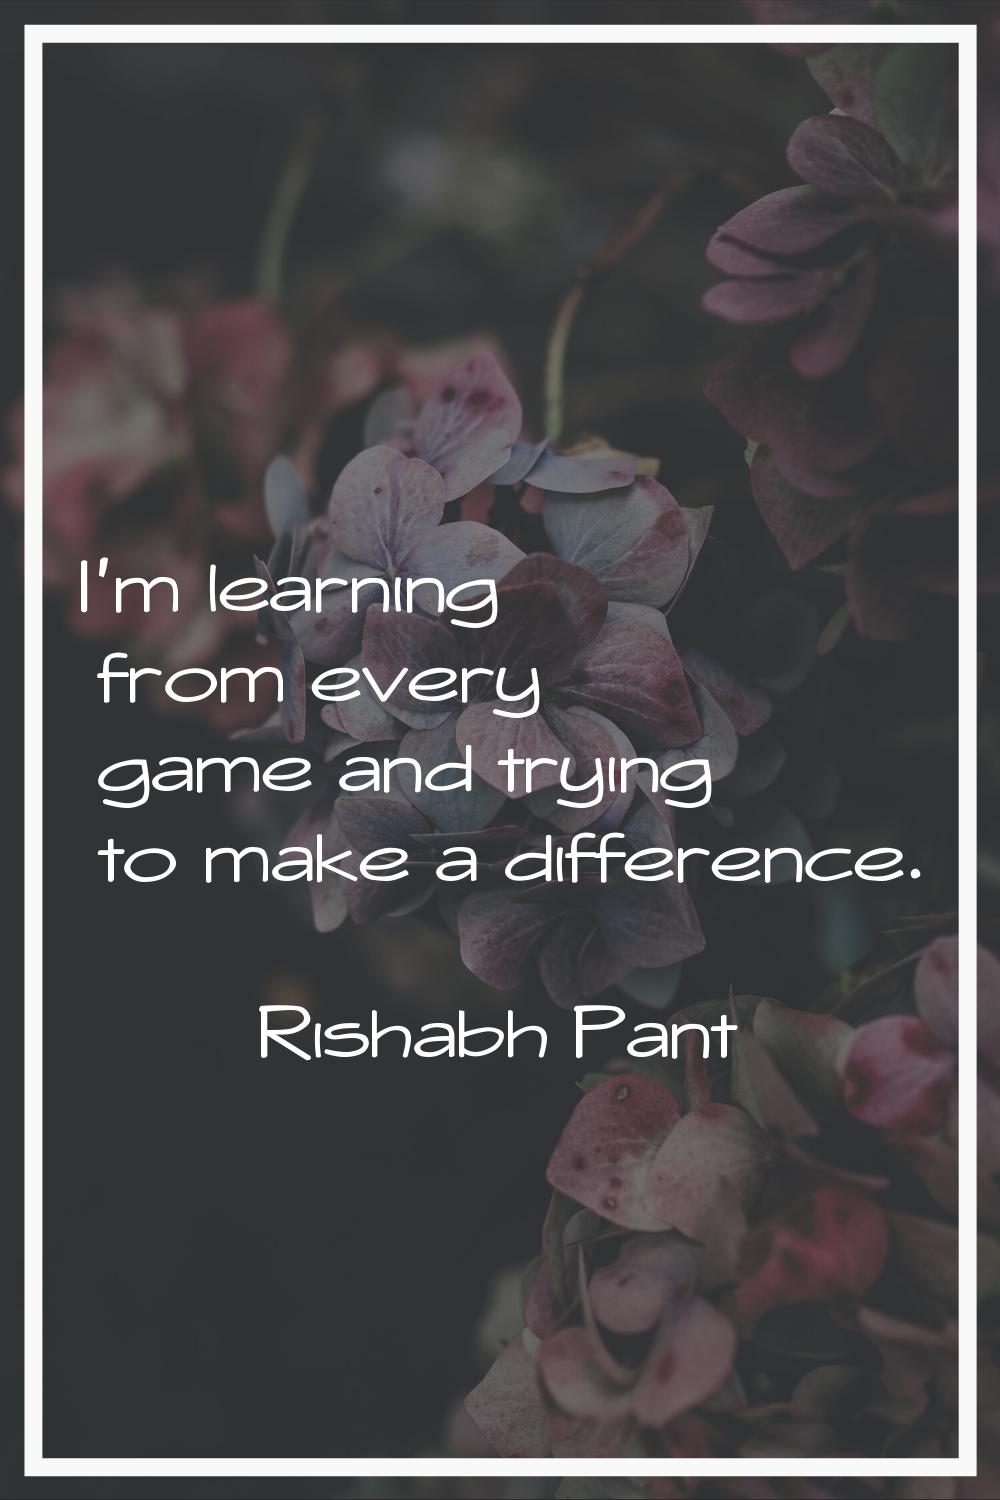 I'm learning from every game and trying to make a difference.